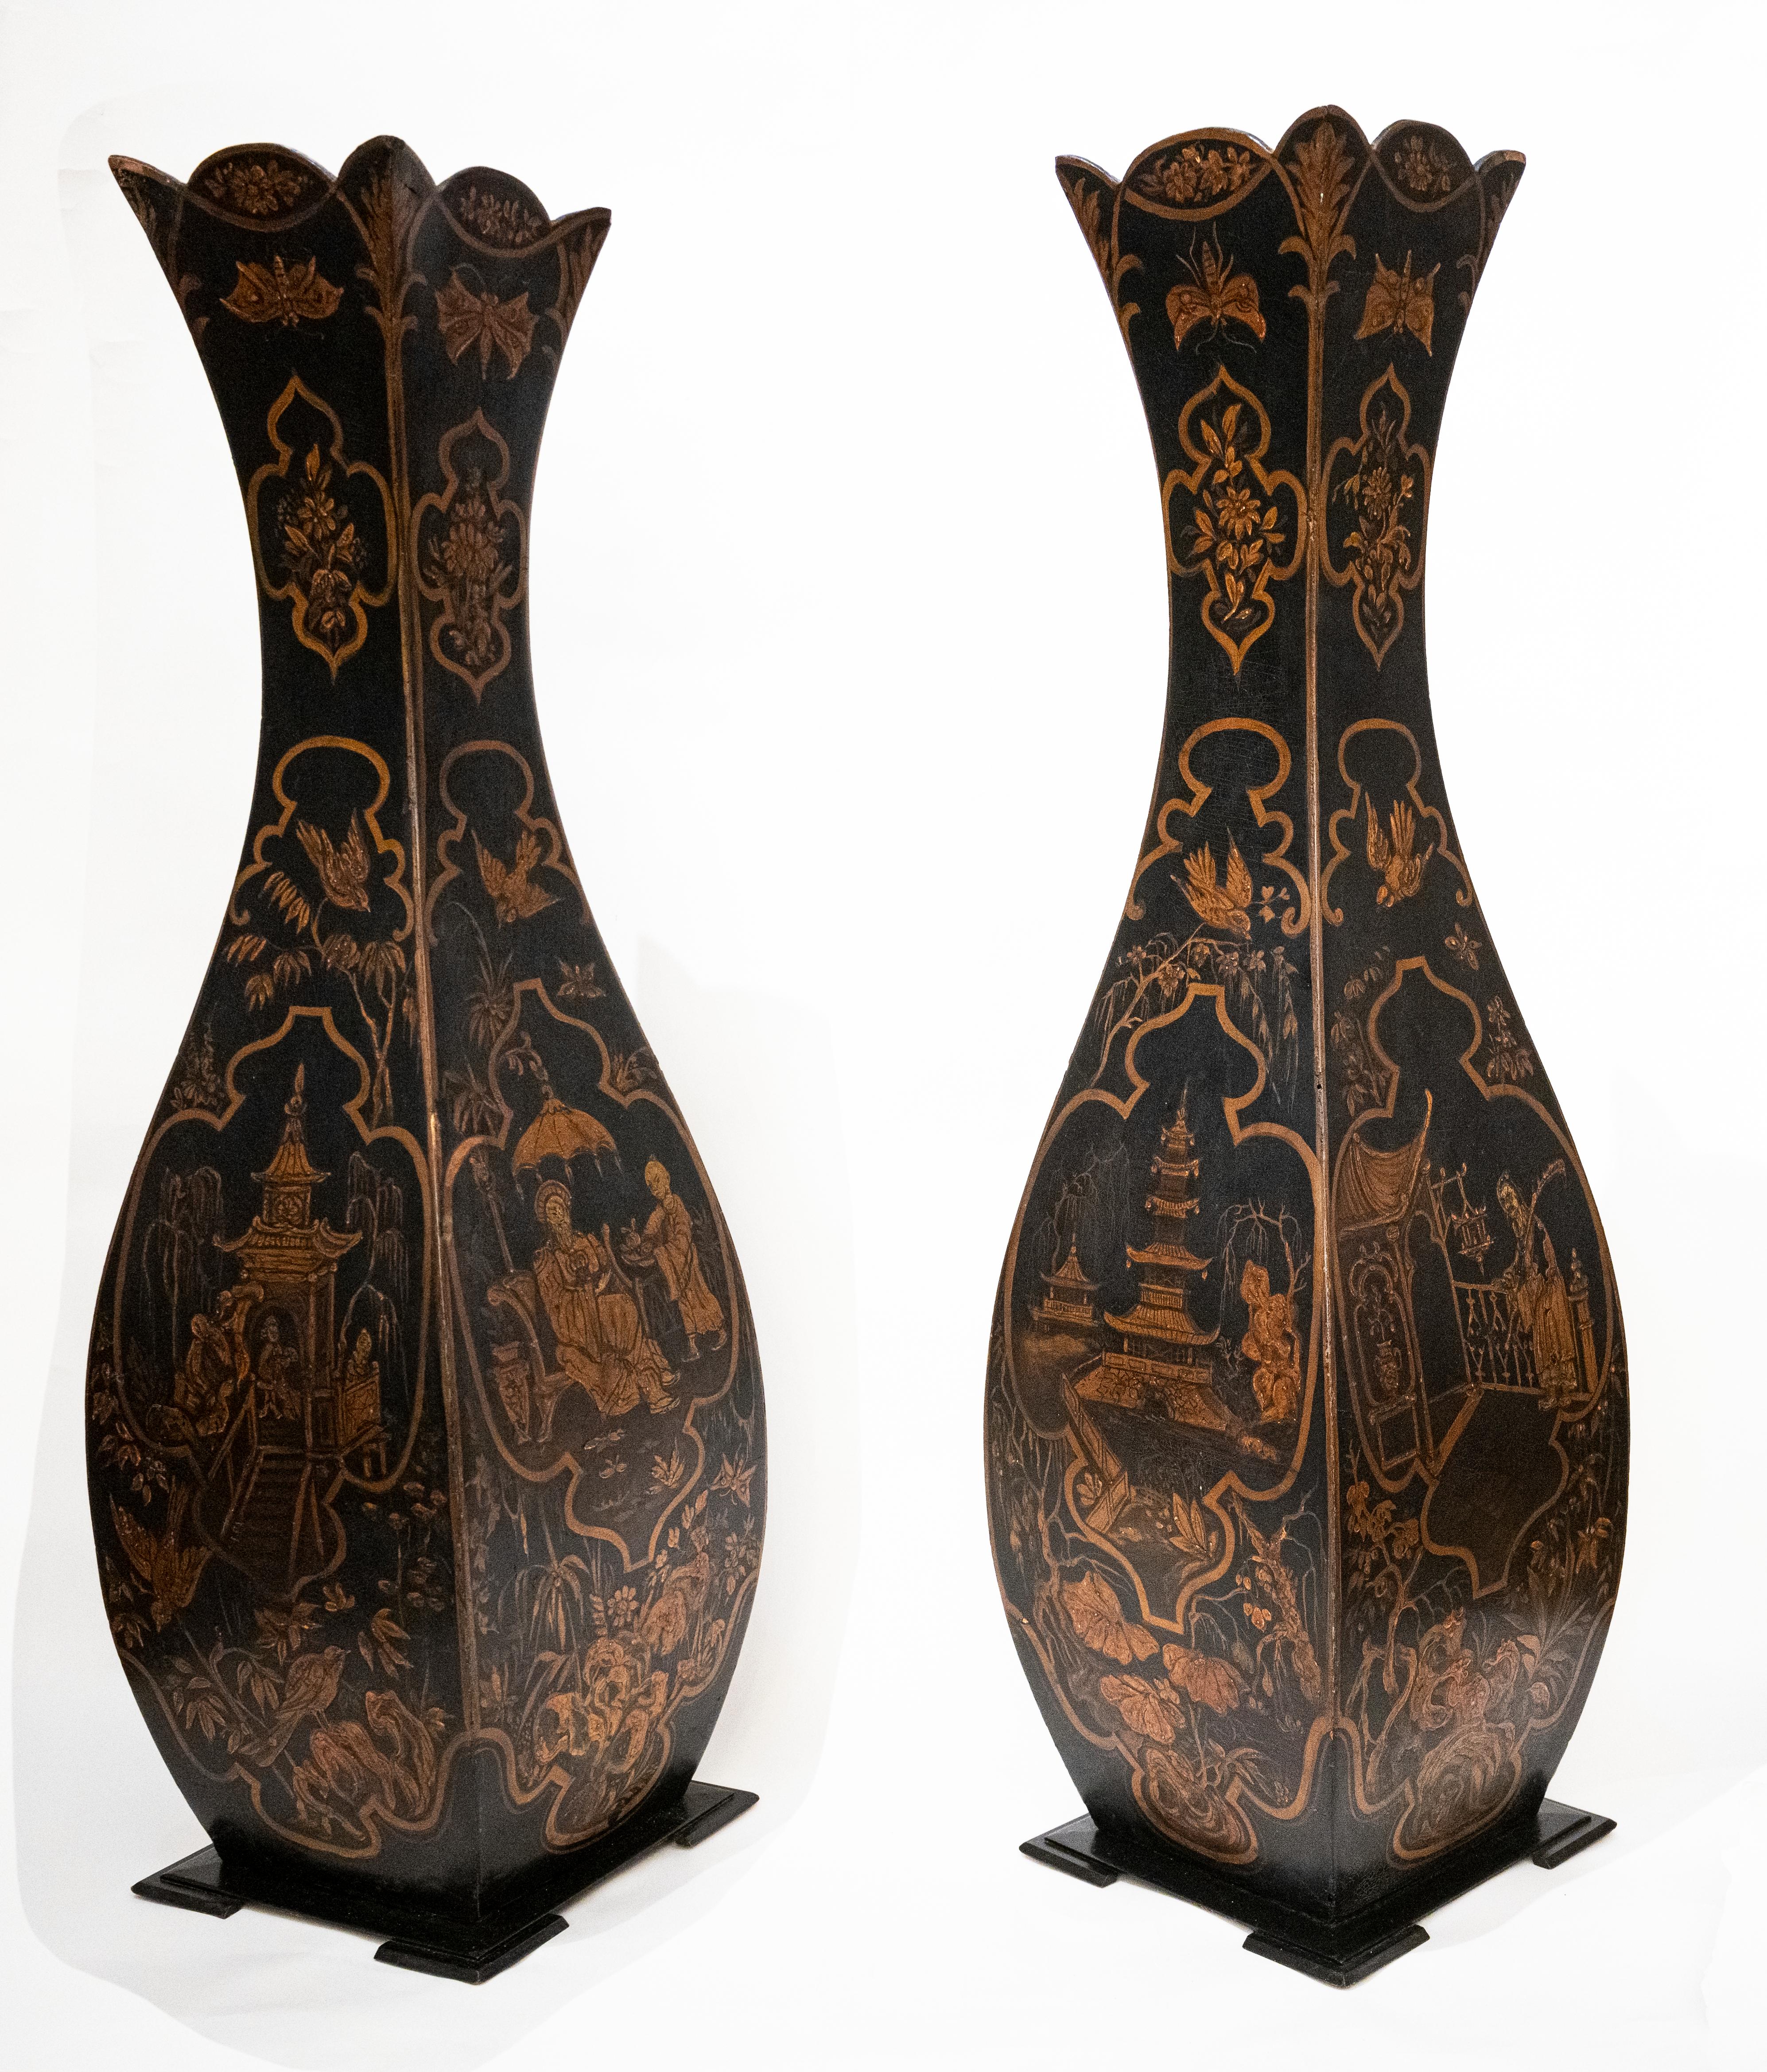 A pair of English wood and paper mache oversized vases. The overscaled form with cartouches having hand painted chinoiserie decorations in gold with a black ground, with individual craquelure? Has square footed bases and scalloped tops. Provenance: